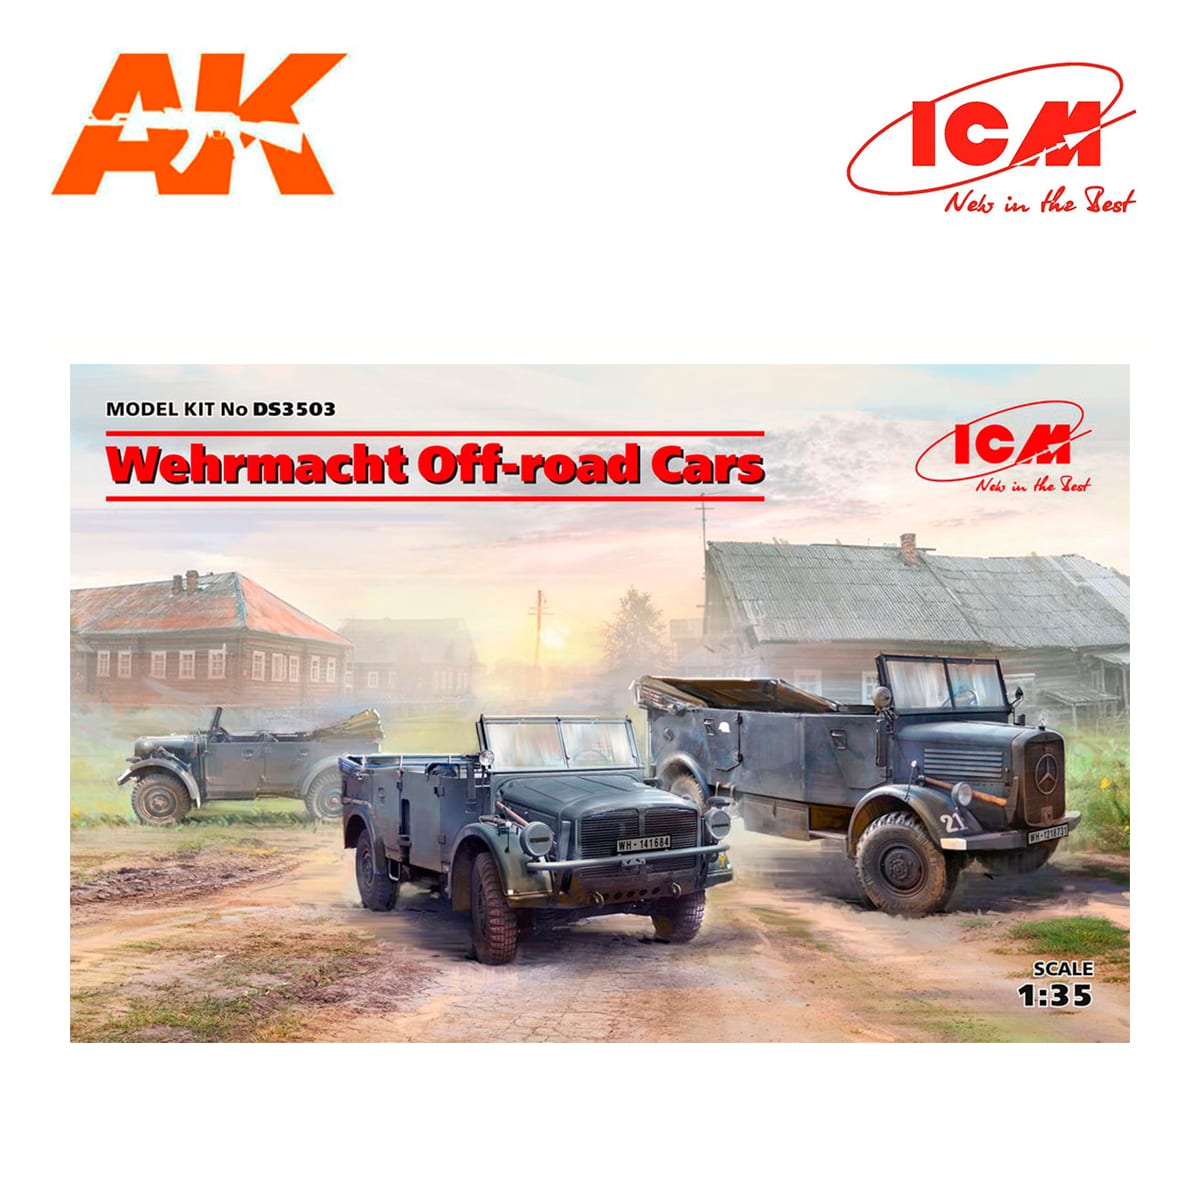 Wehrmacht Off-road Cars (Kfz.1, Horch 108 Typ 40, L1500A) 1/35